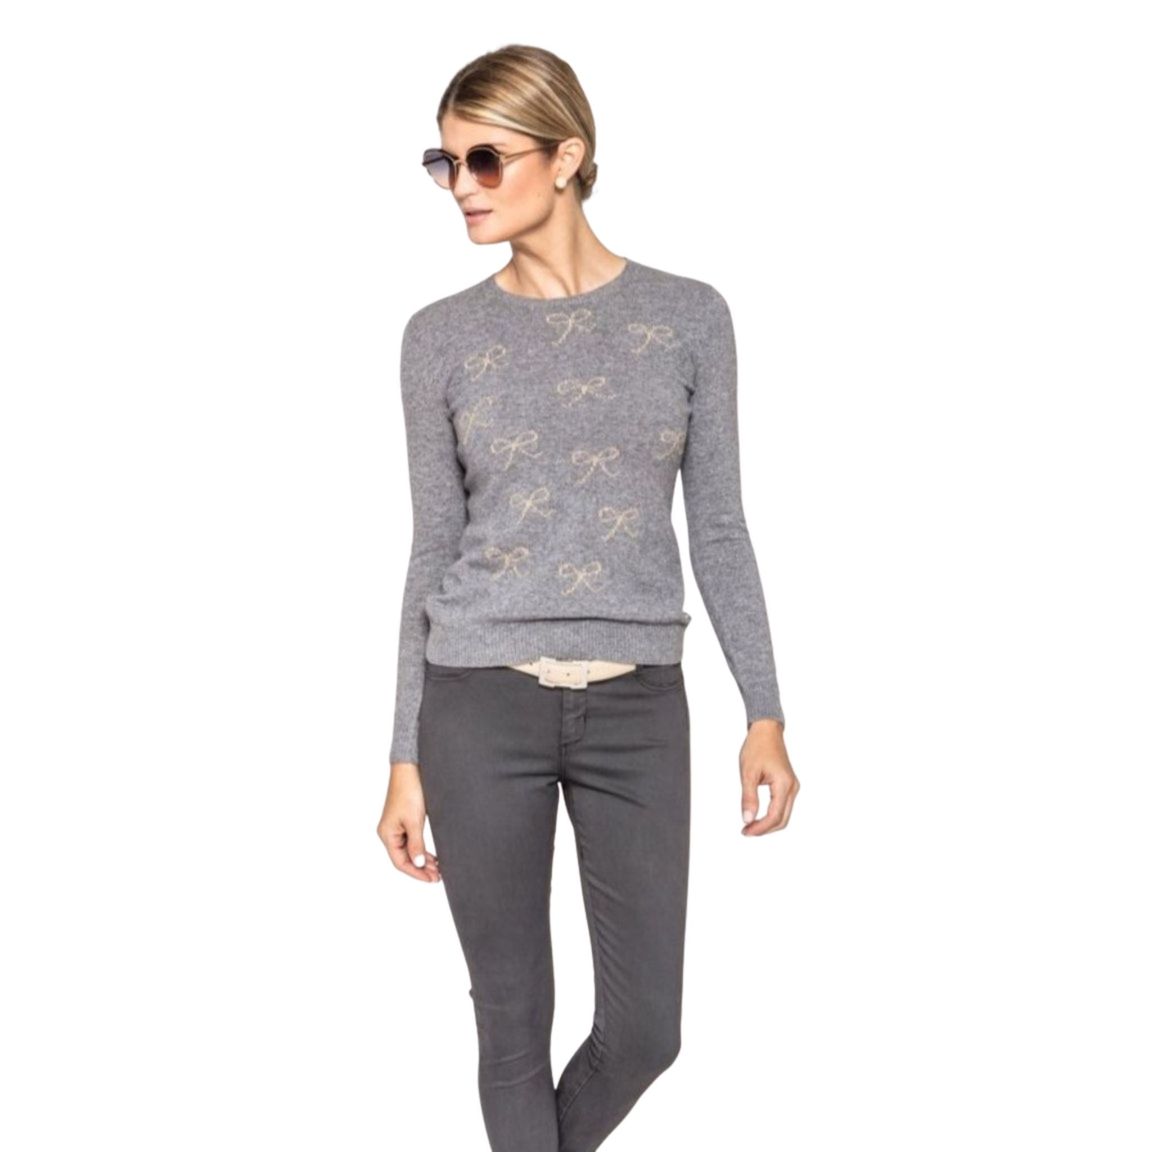 Felicity Sweater with Beige Bows